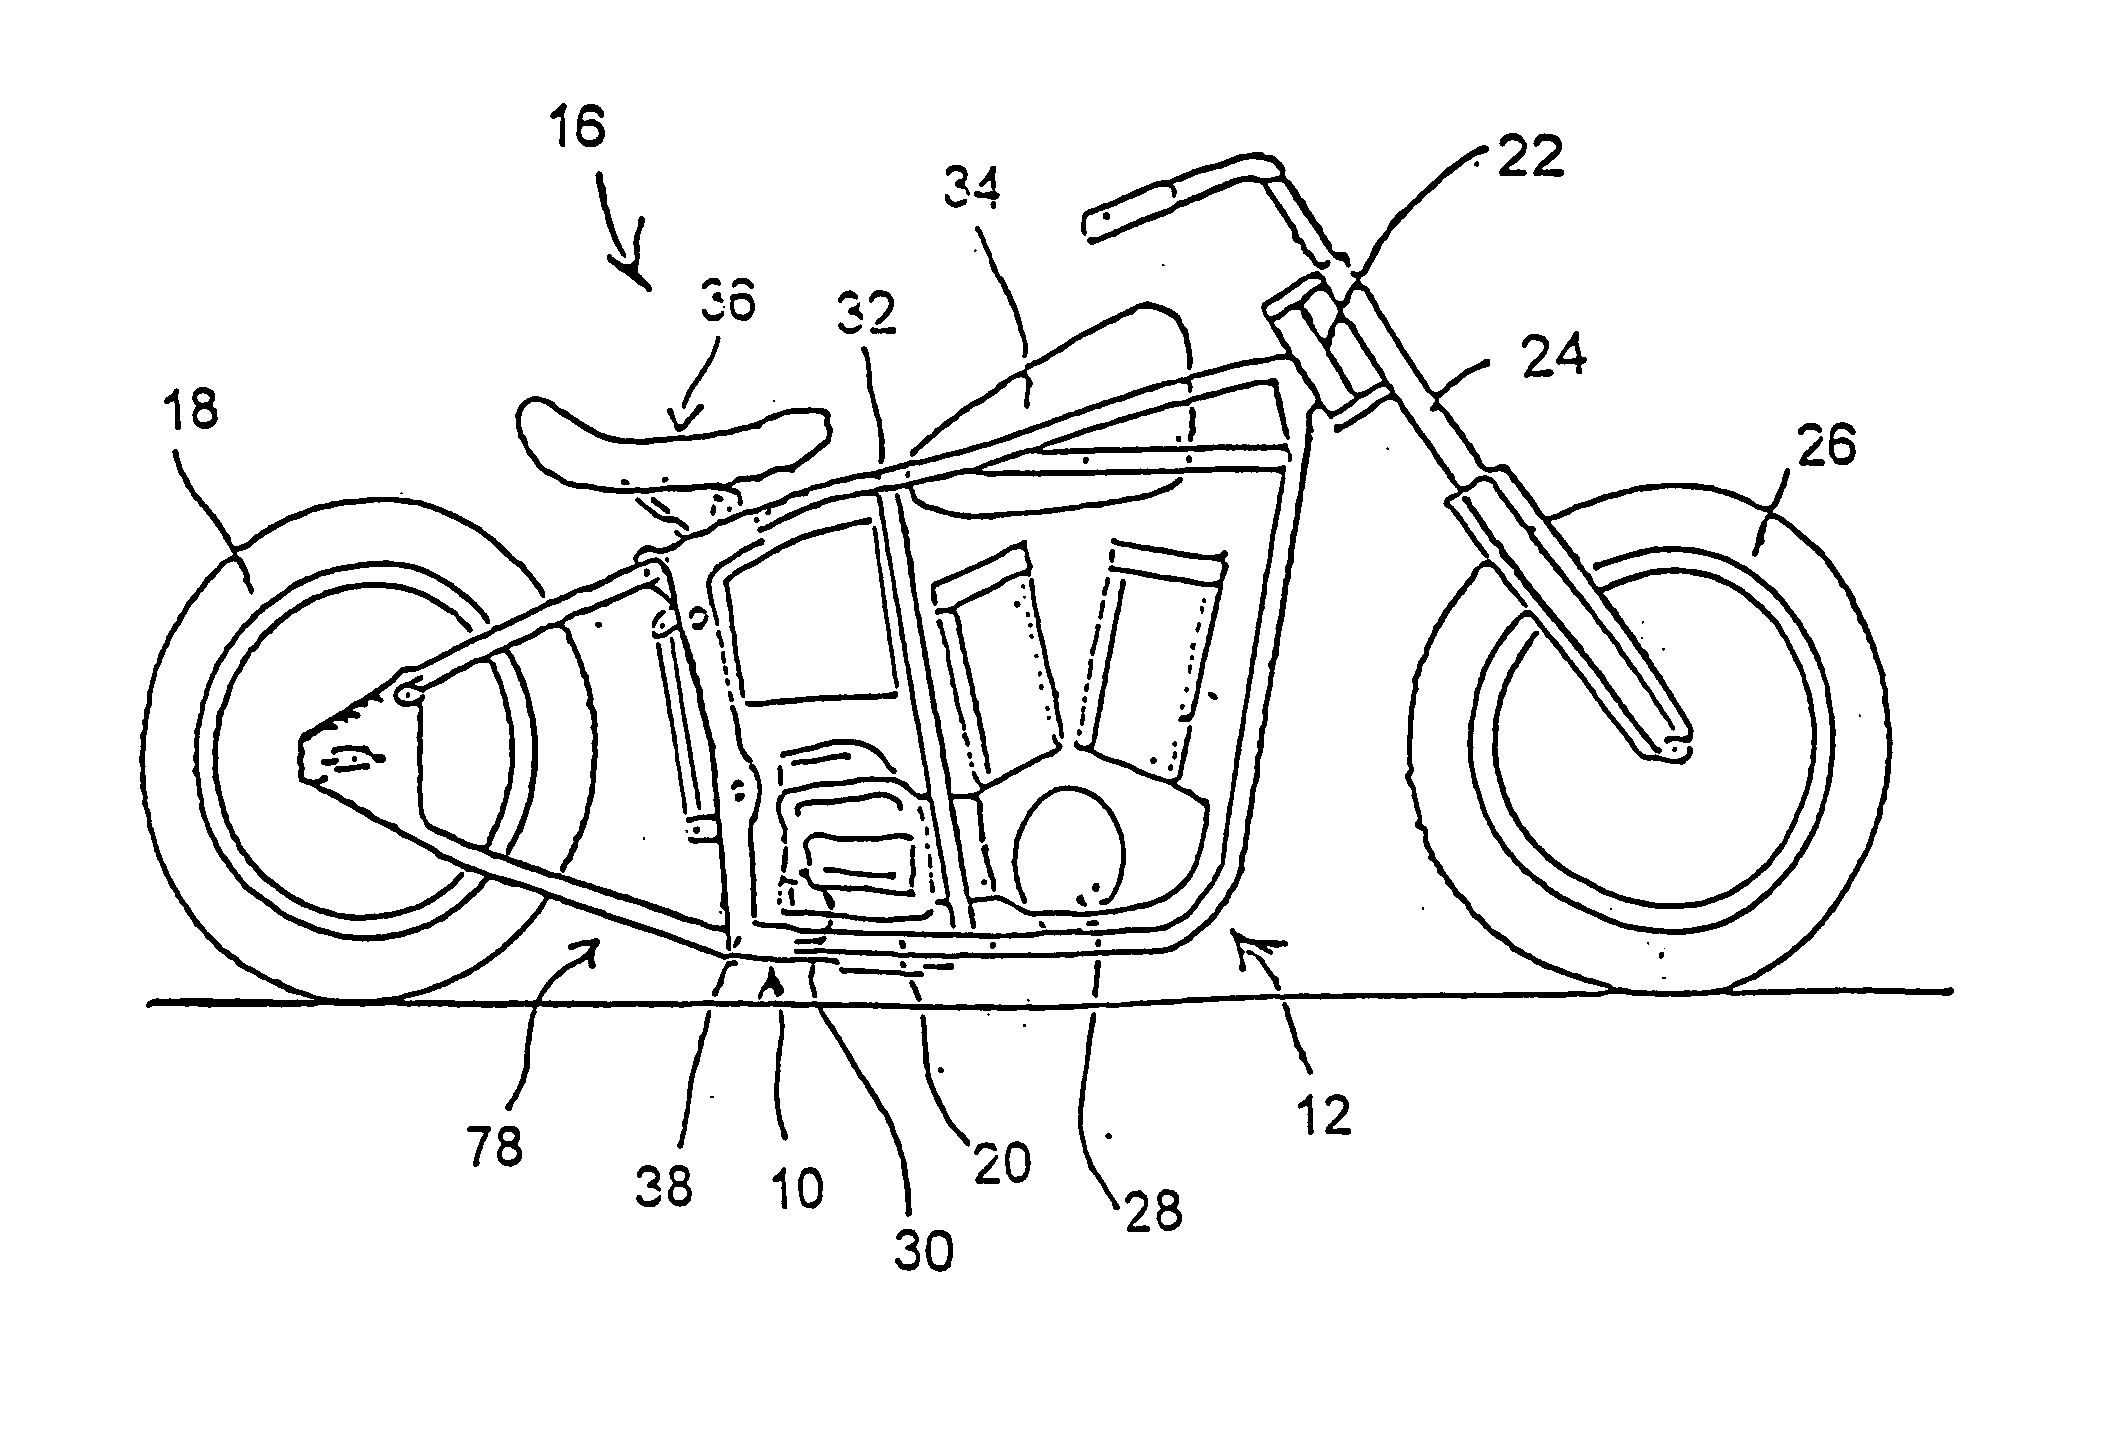 Multi-linking, rear suspension system for two-wheeled motor vehicles